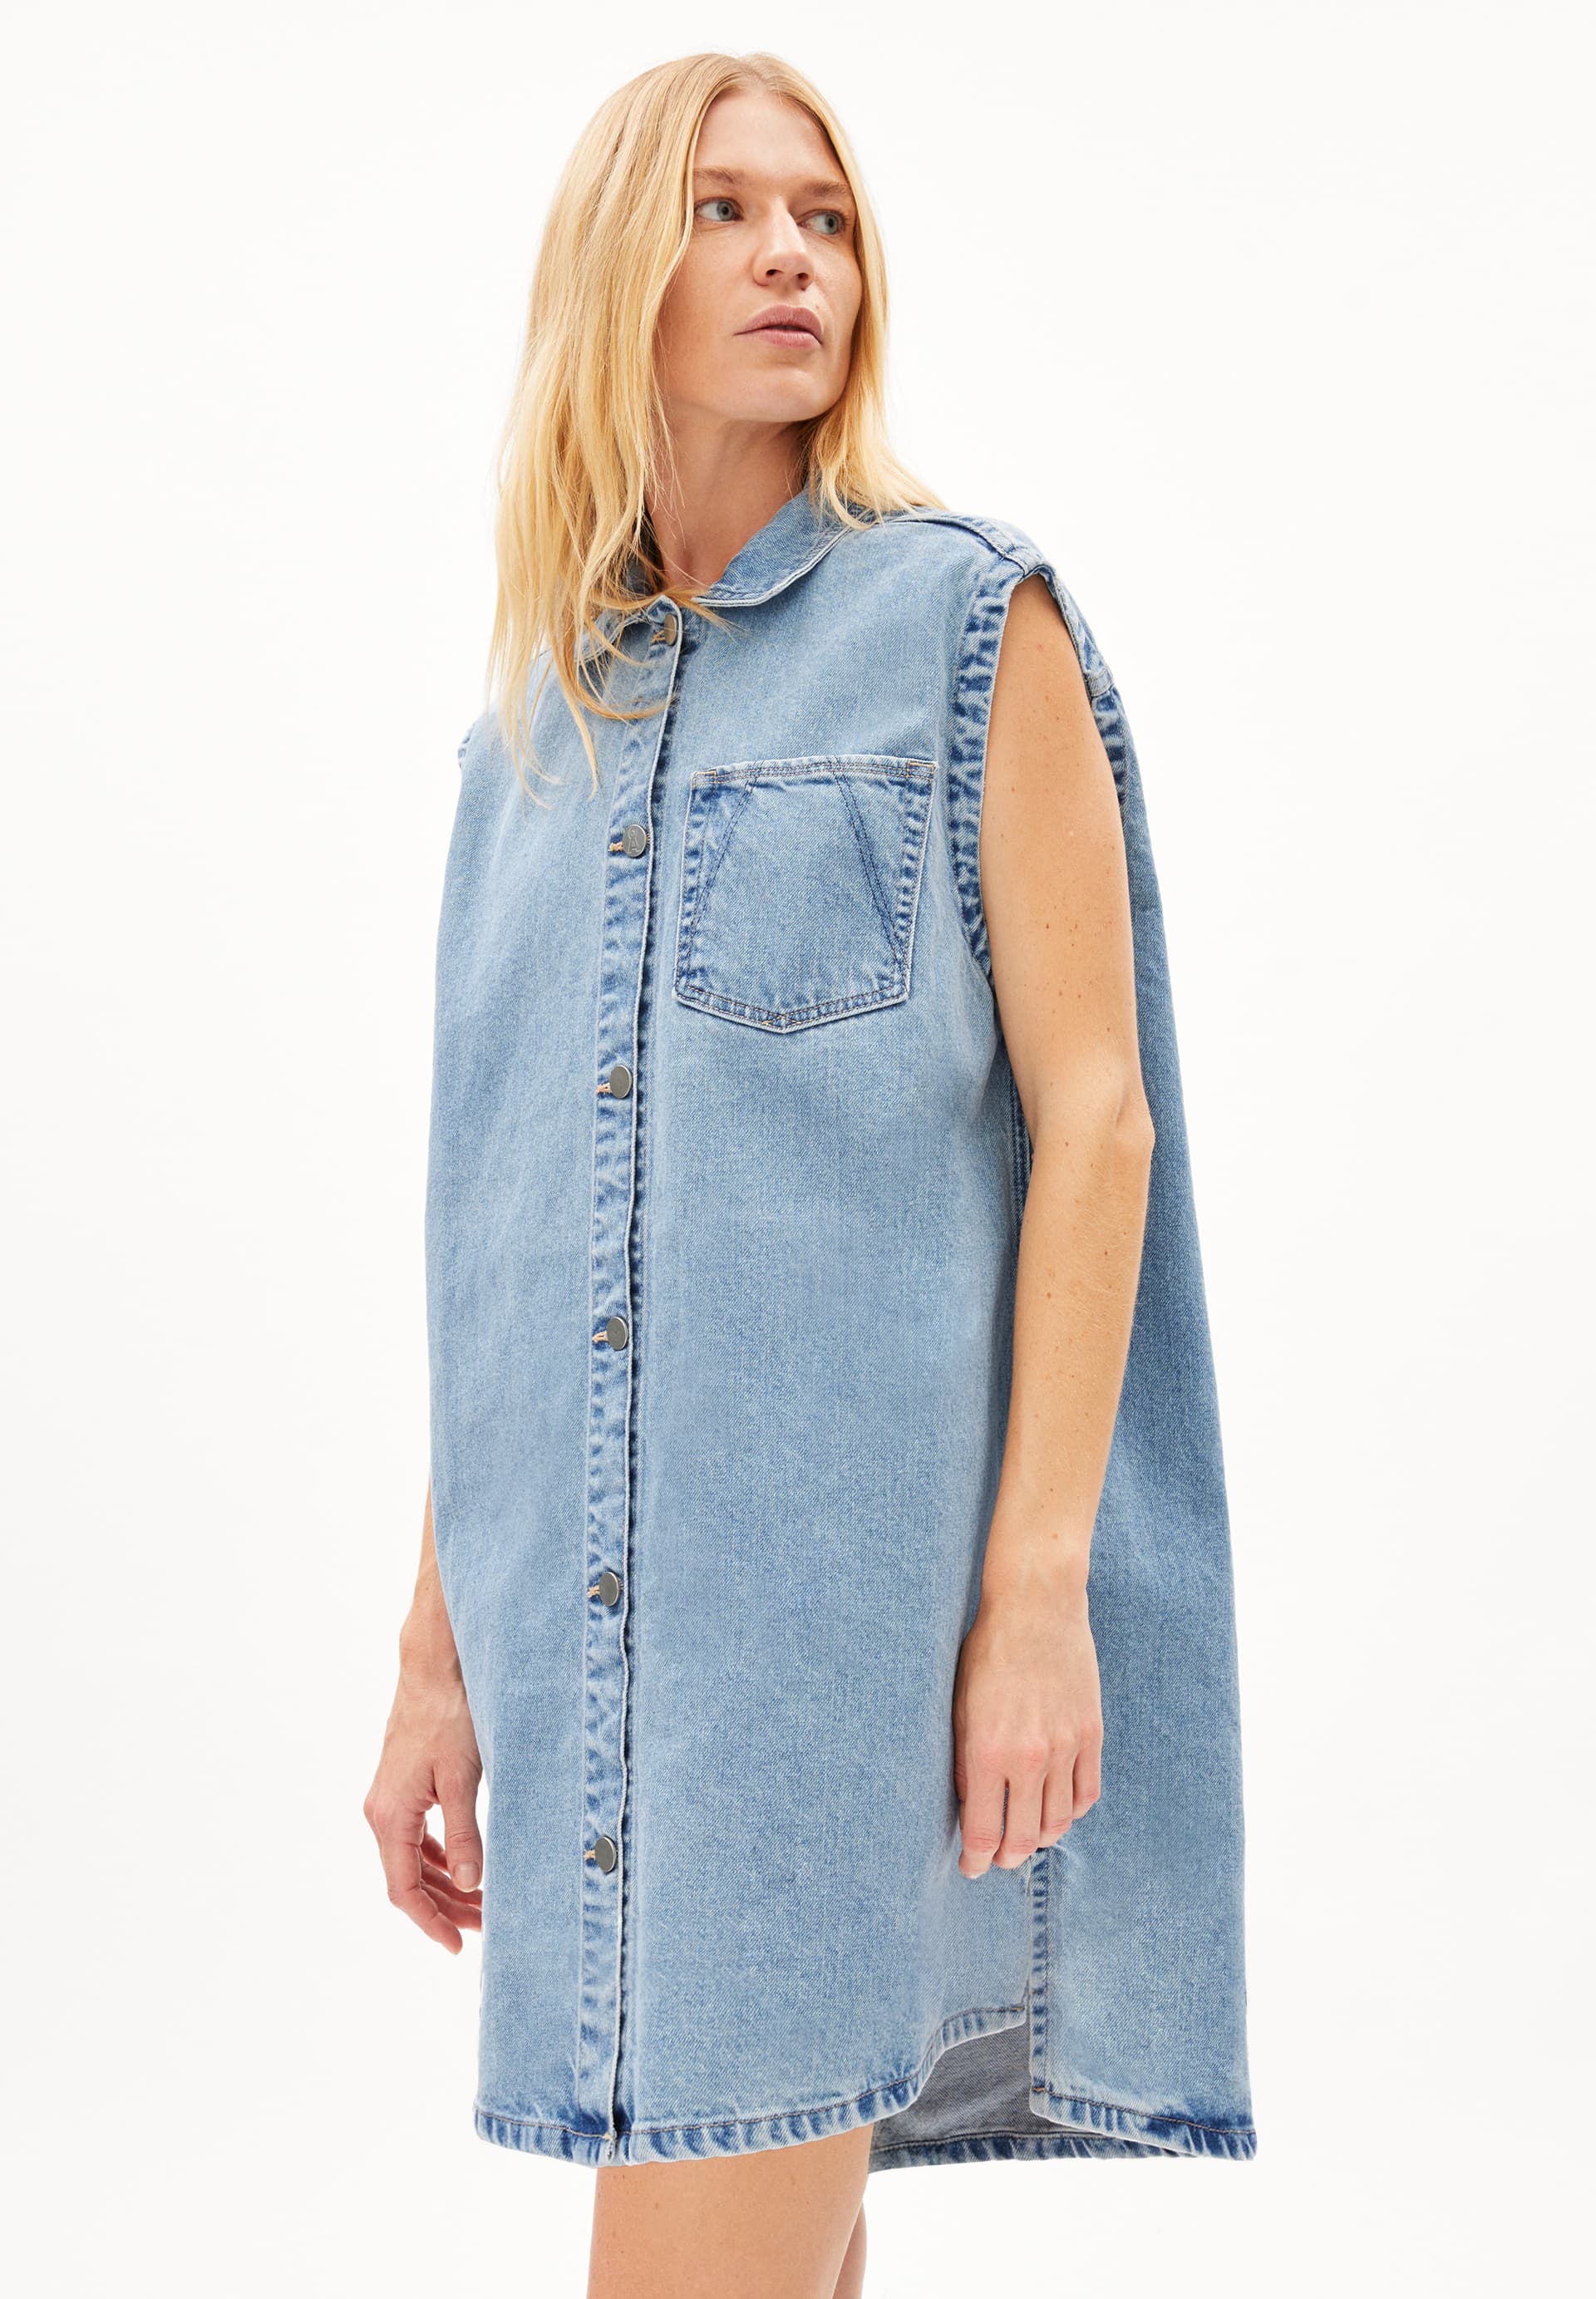 TAALUHLA Denim Dress Slim Fit made of recycled Cotton